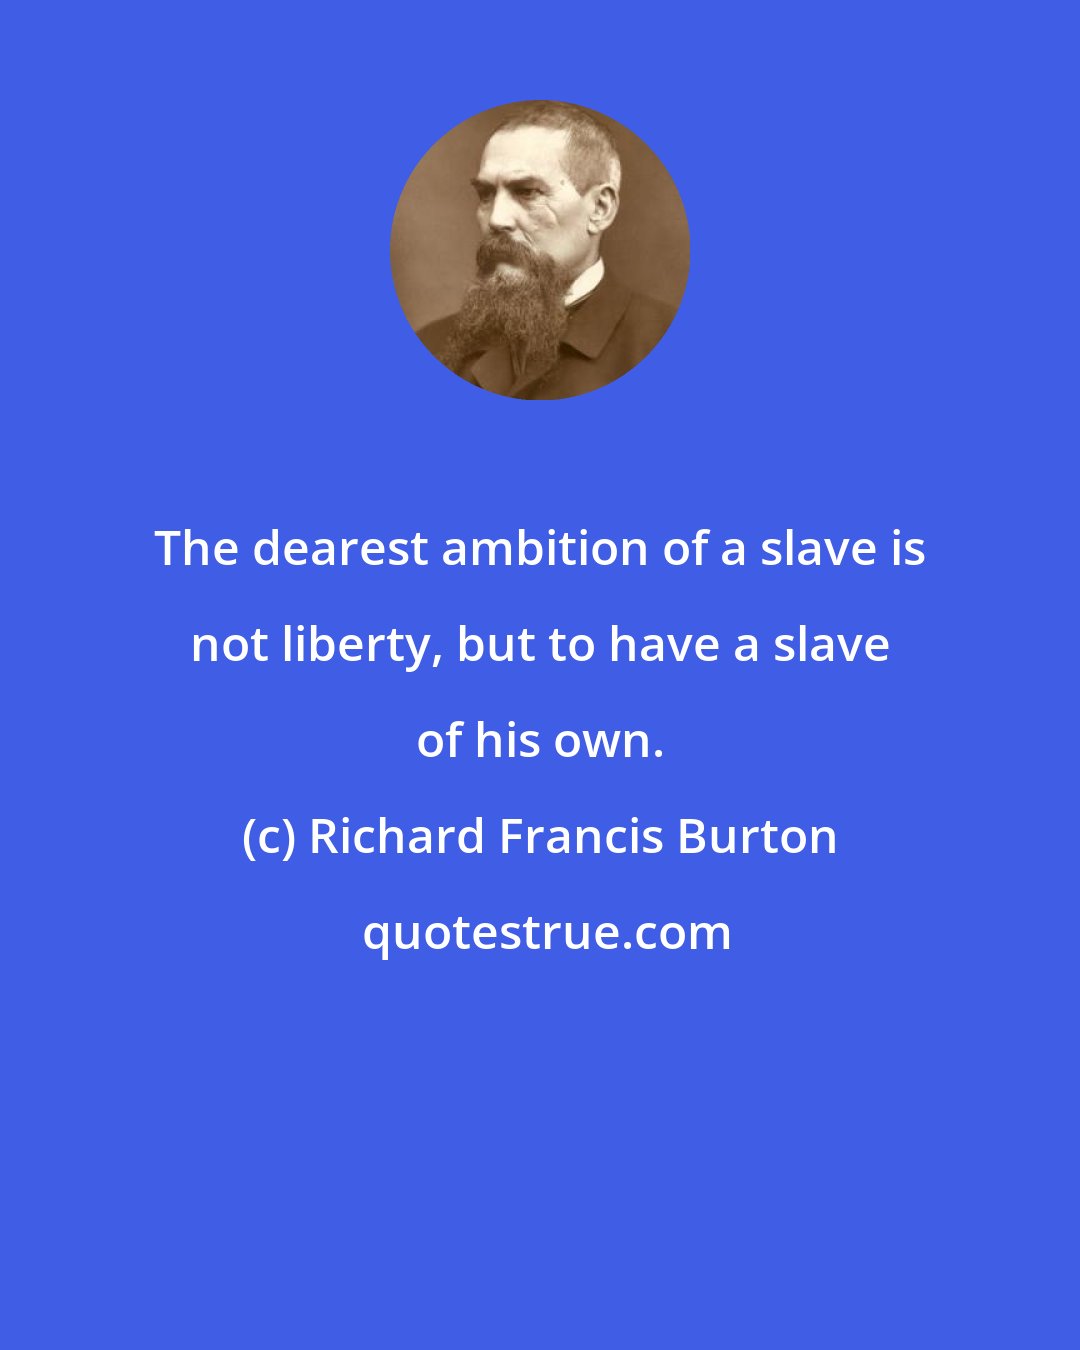 Richard Francis Burton: The dearest ambition of a slave is not liberty, but to have a slave of his own.